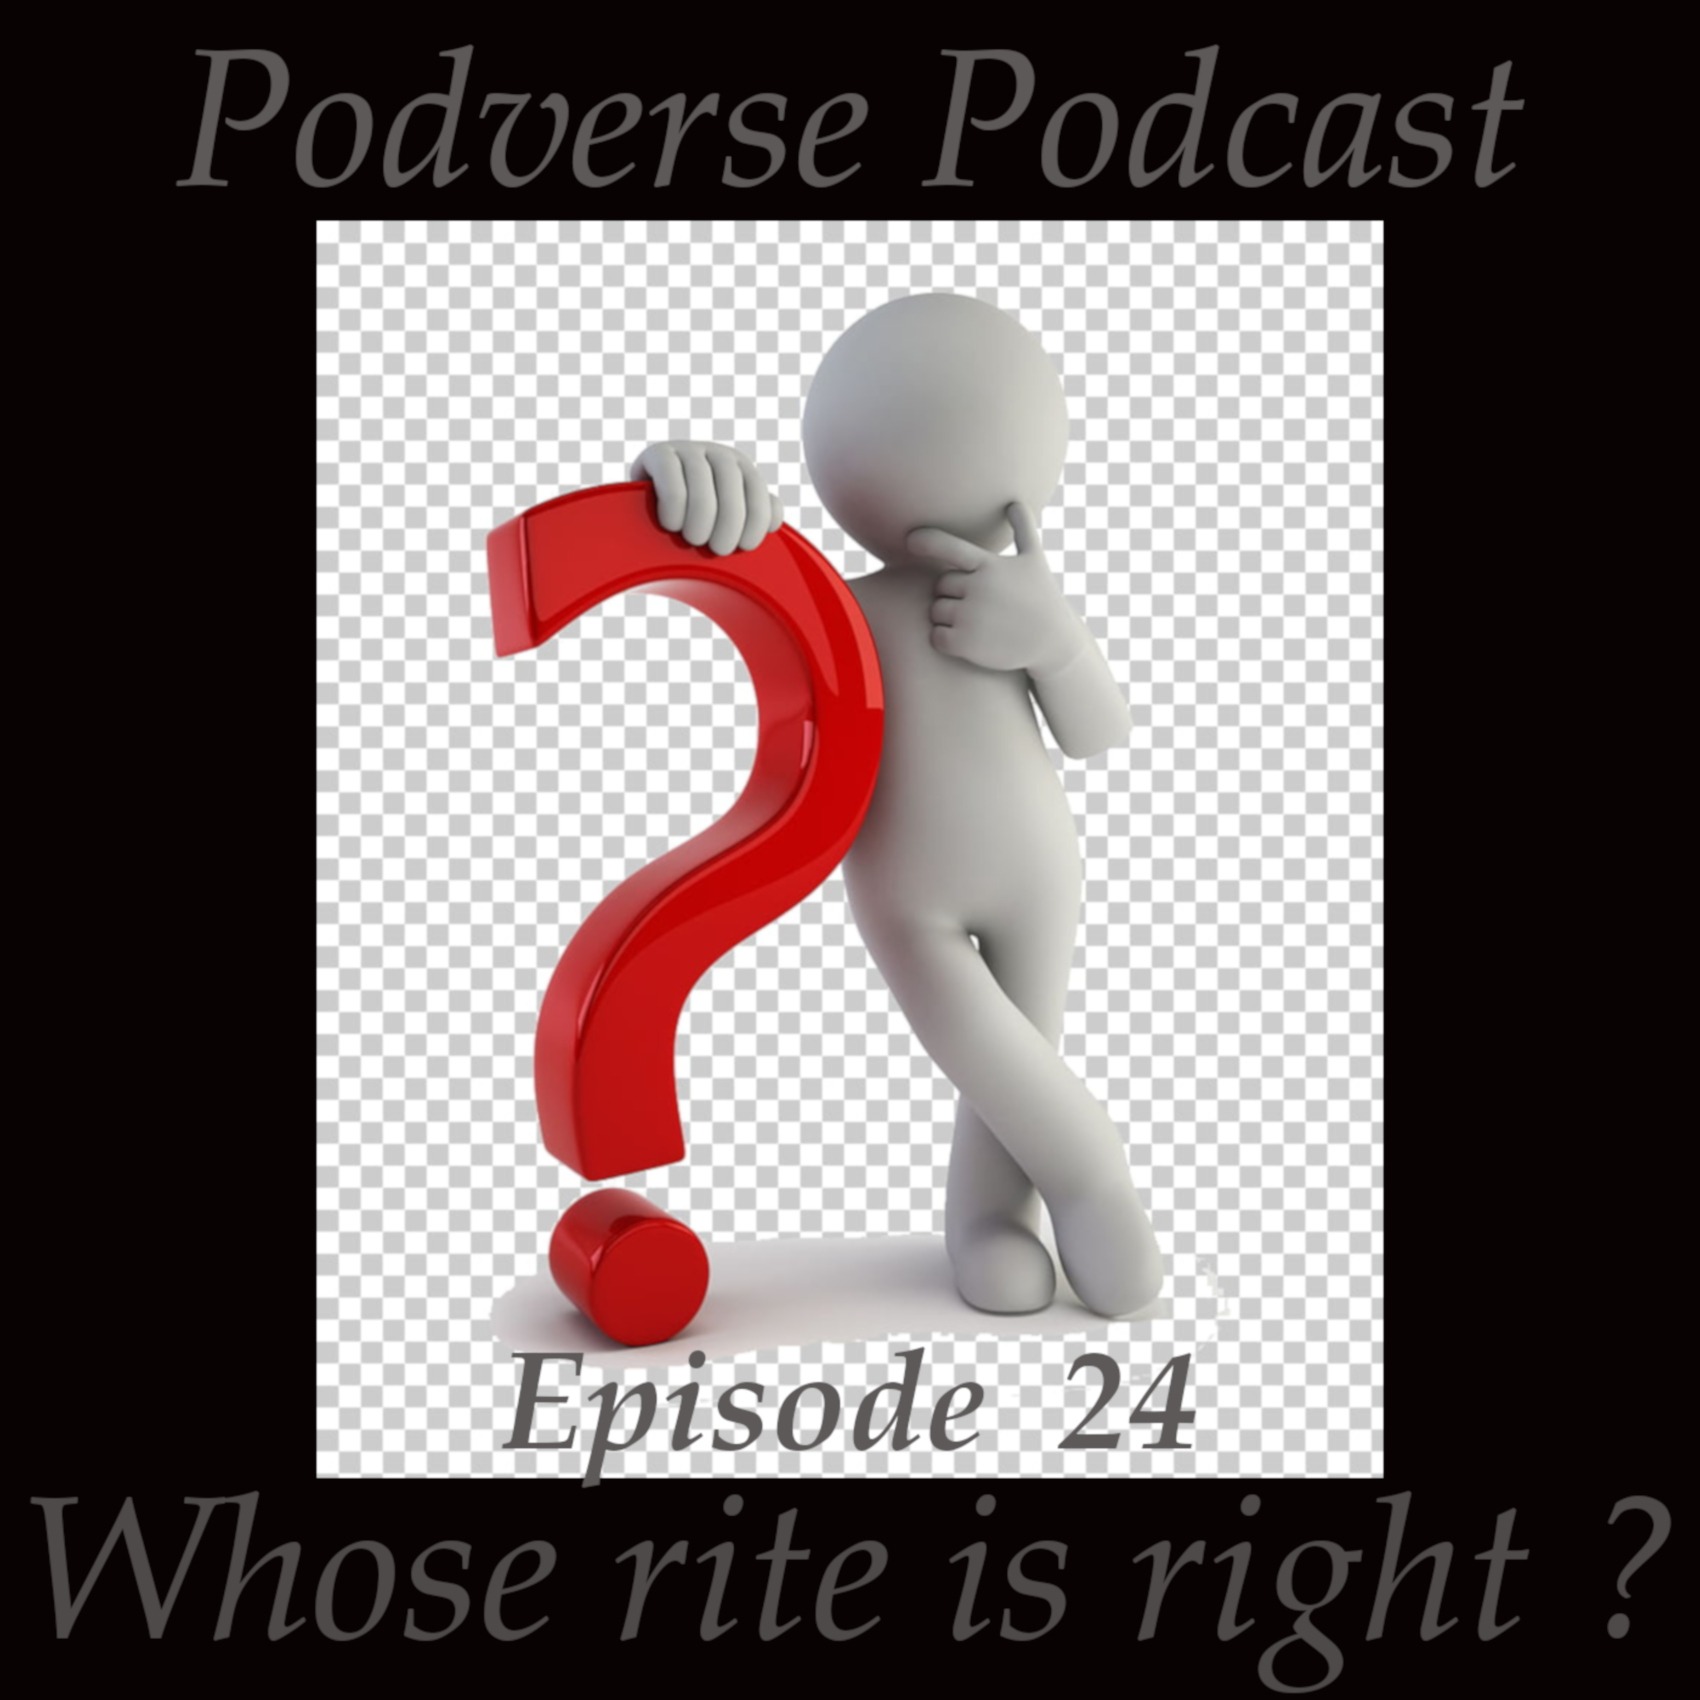 Whose rite is right? - Episode 24